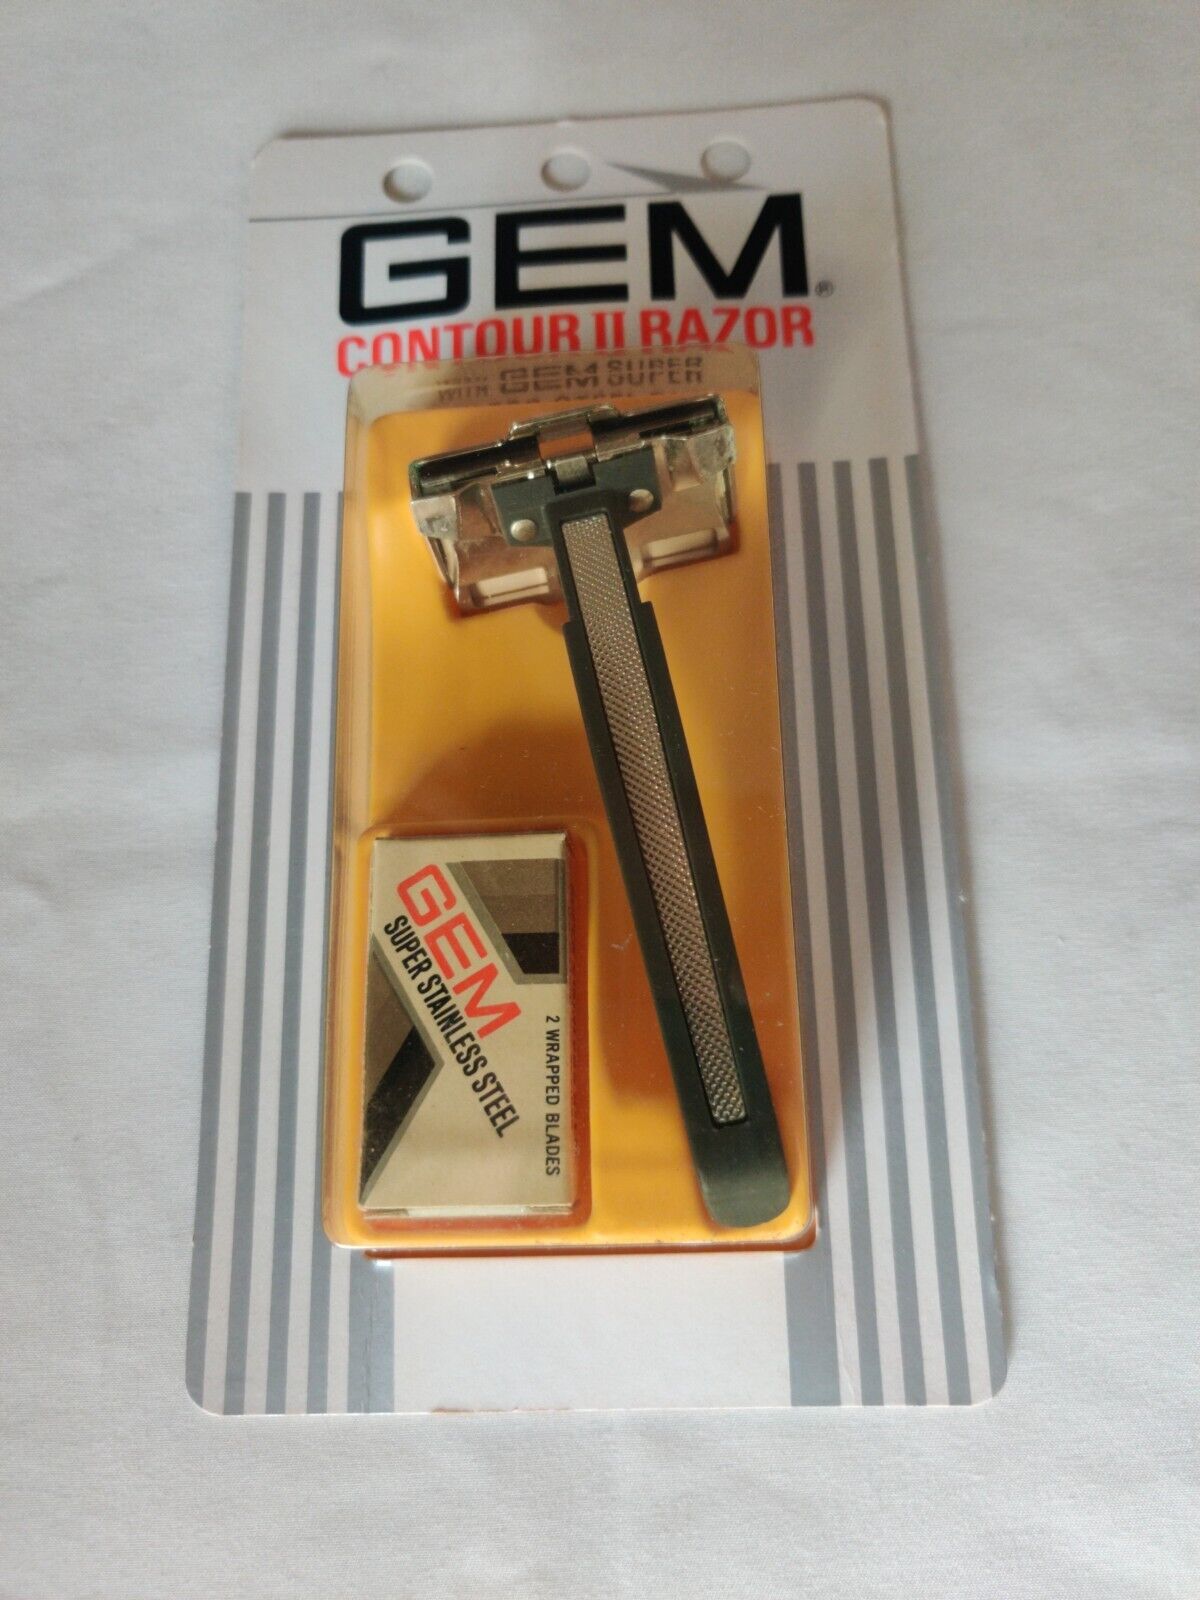 Gem Contour II Razor With 2 Super Stainless Steel Blades Vintage Old Stock 